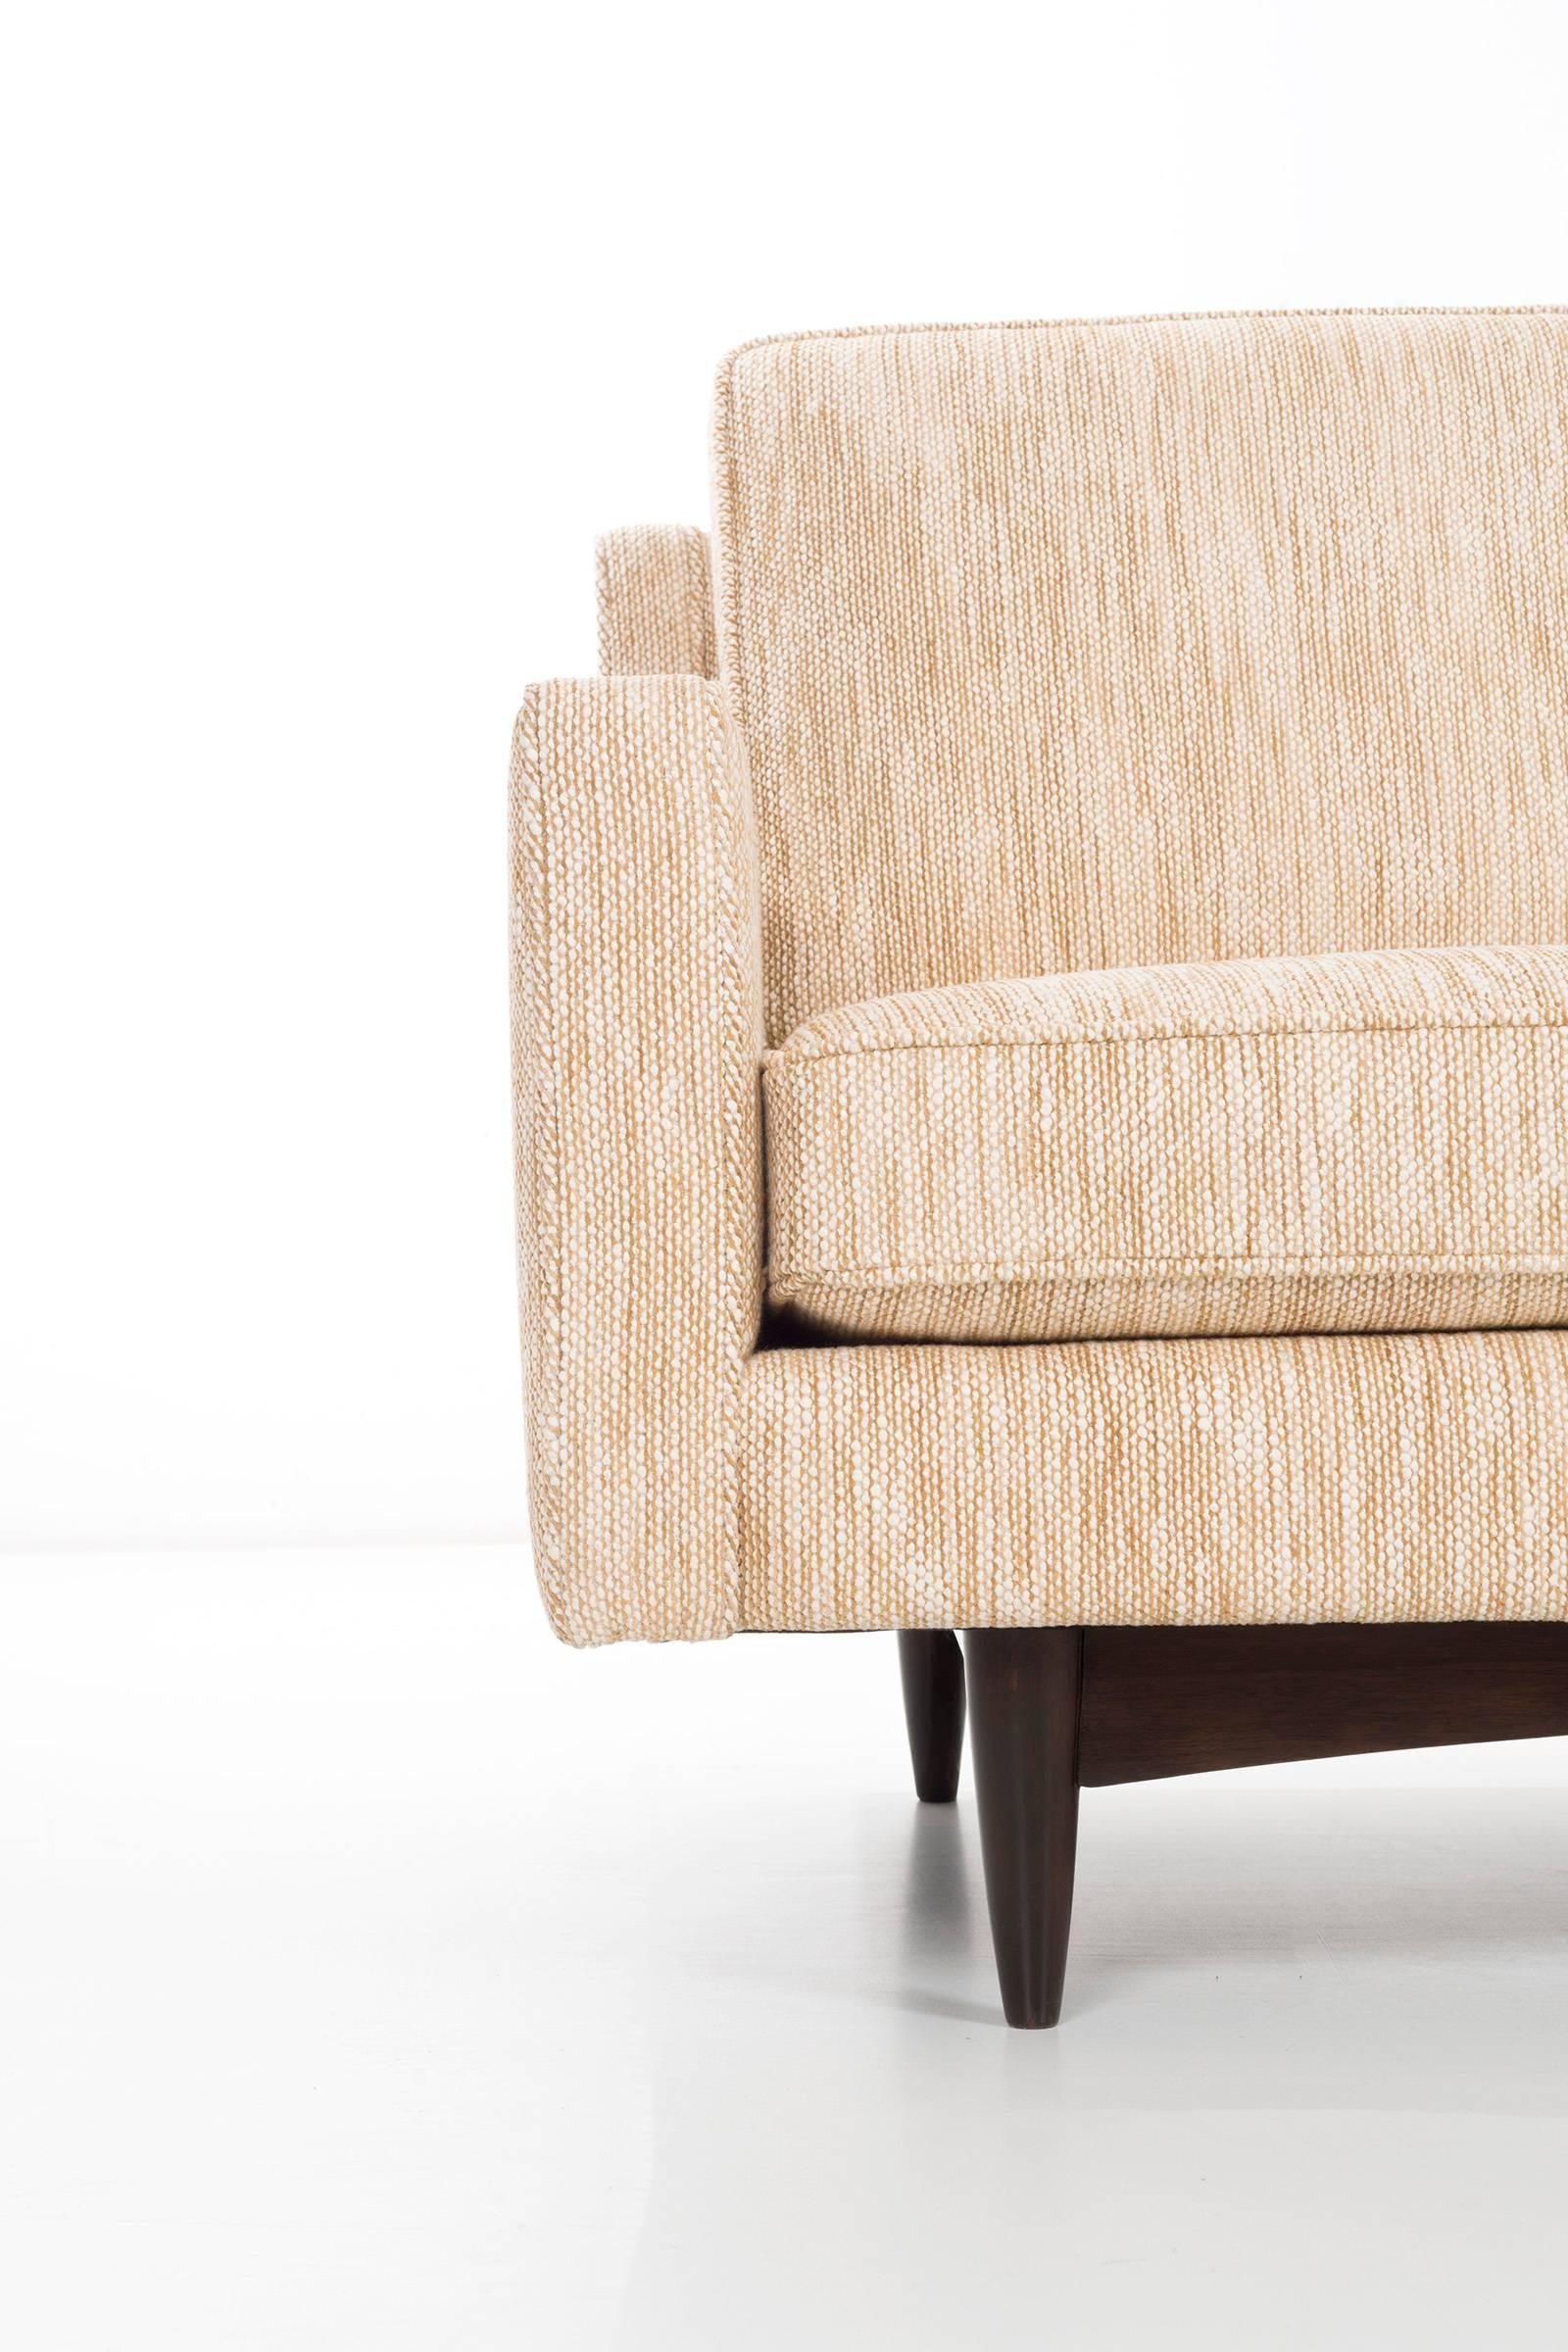 Sofa from Italy in the style of Osvaldo Borsani, loose cushion seat and back, solid tapered legs with connecting arched braces with sloped arms.
Reupholstered with woven wool fabric.

 